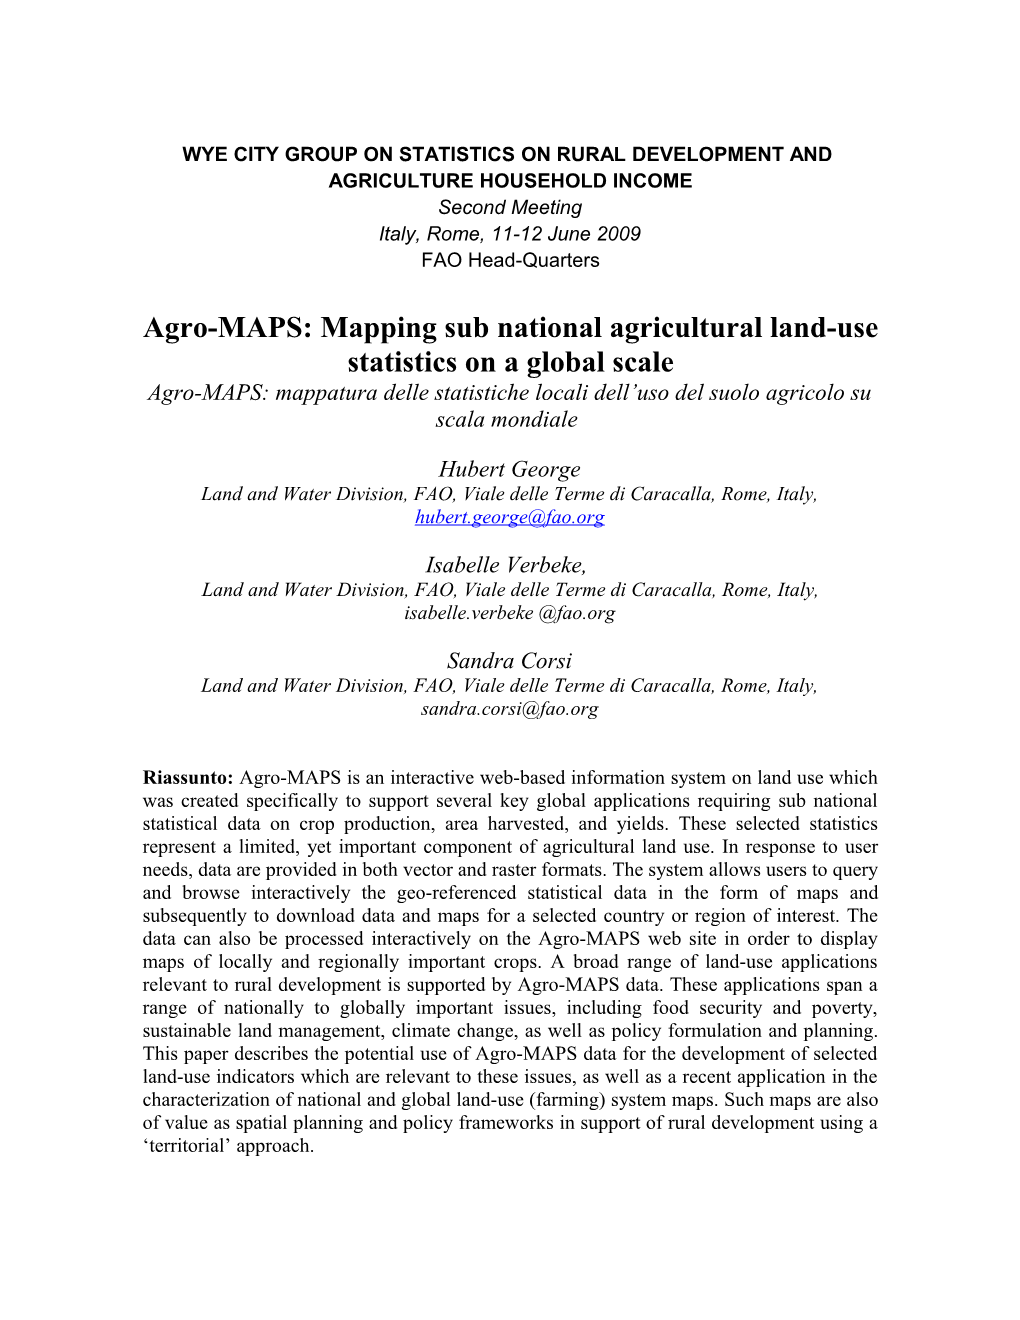 Mapping Sub National Agricultural-Production Statistics On A Global Scale: The Agro-MAPS Initiative